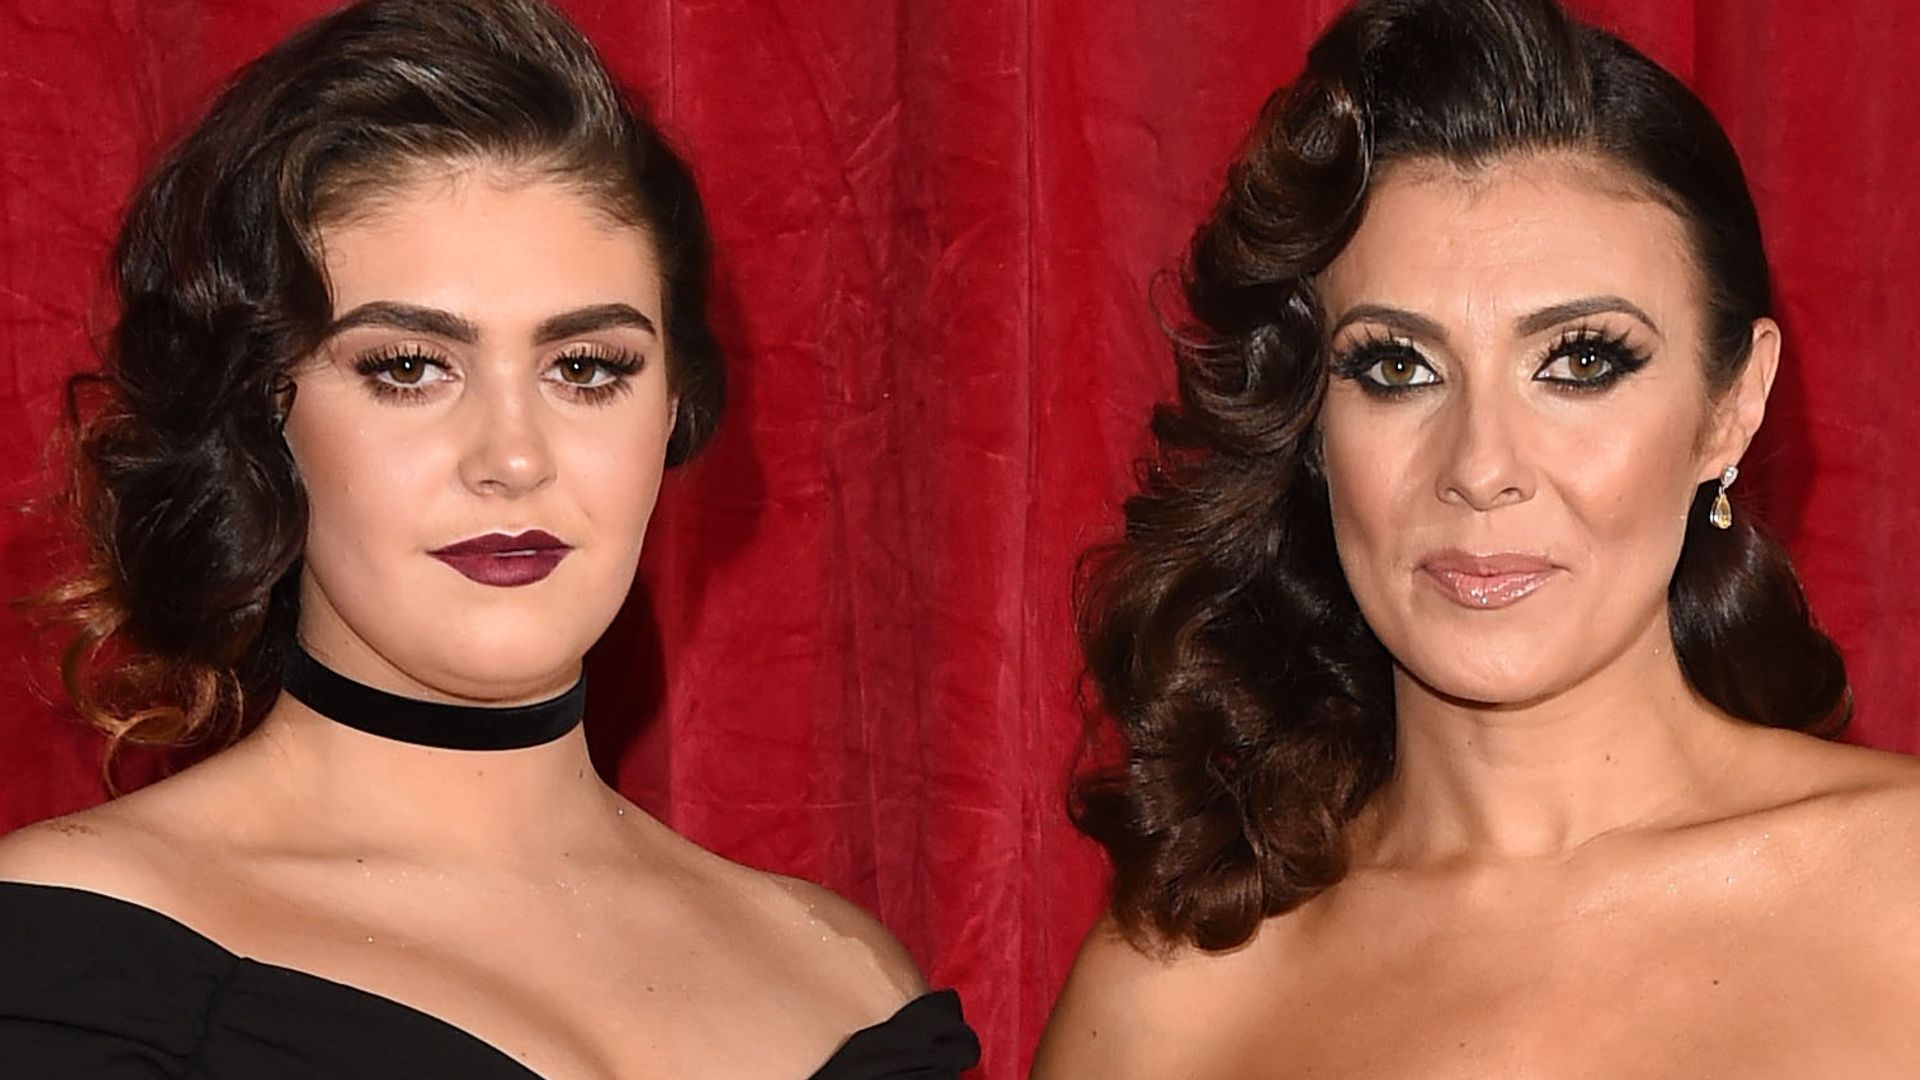 Kym Marsh in a red dress and daughter Emily Cunliffe in a black dress with dark lipstick